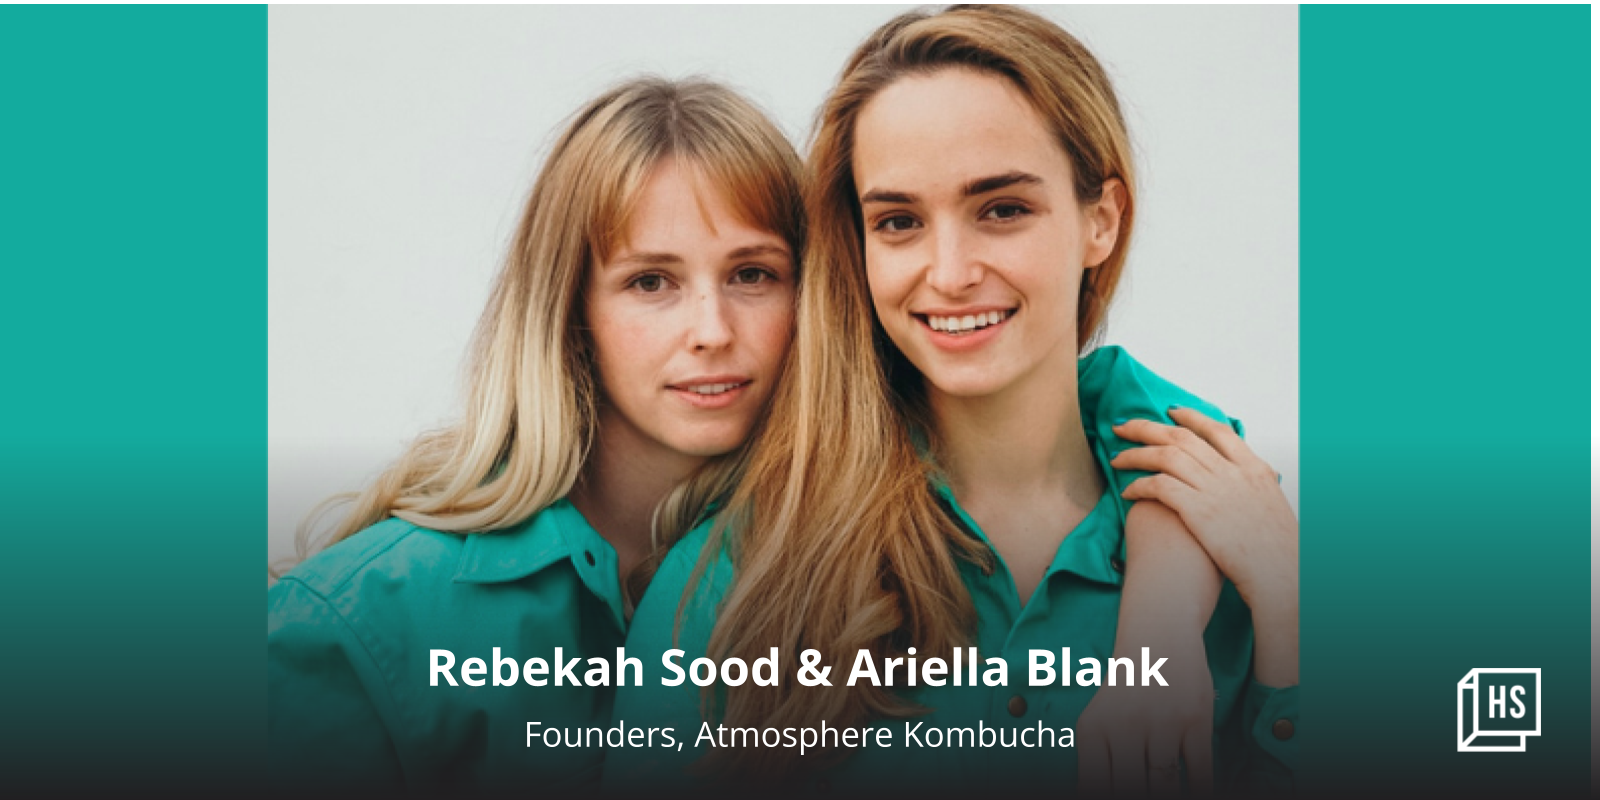 These American sisters started a kombucha brand to promote gut health

